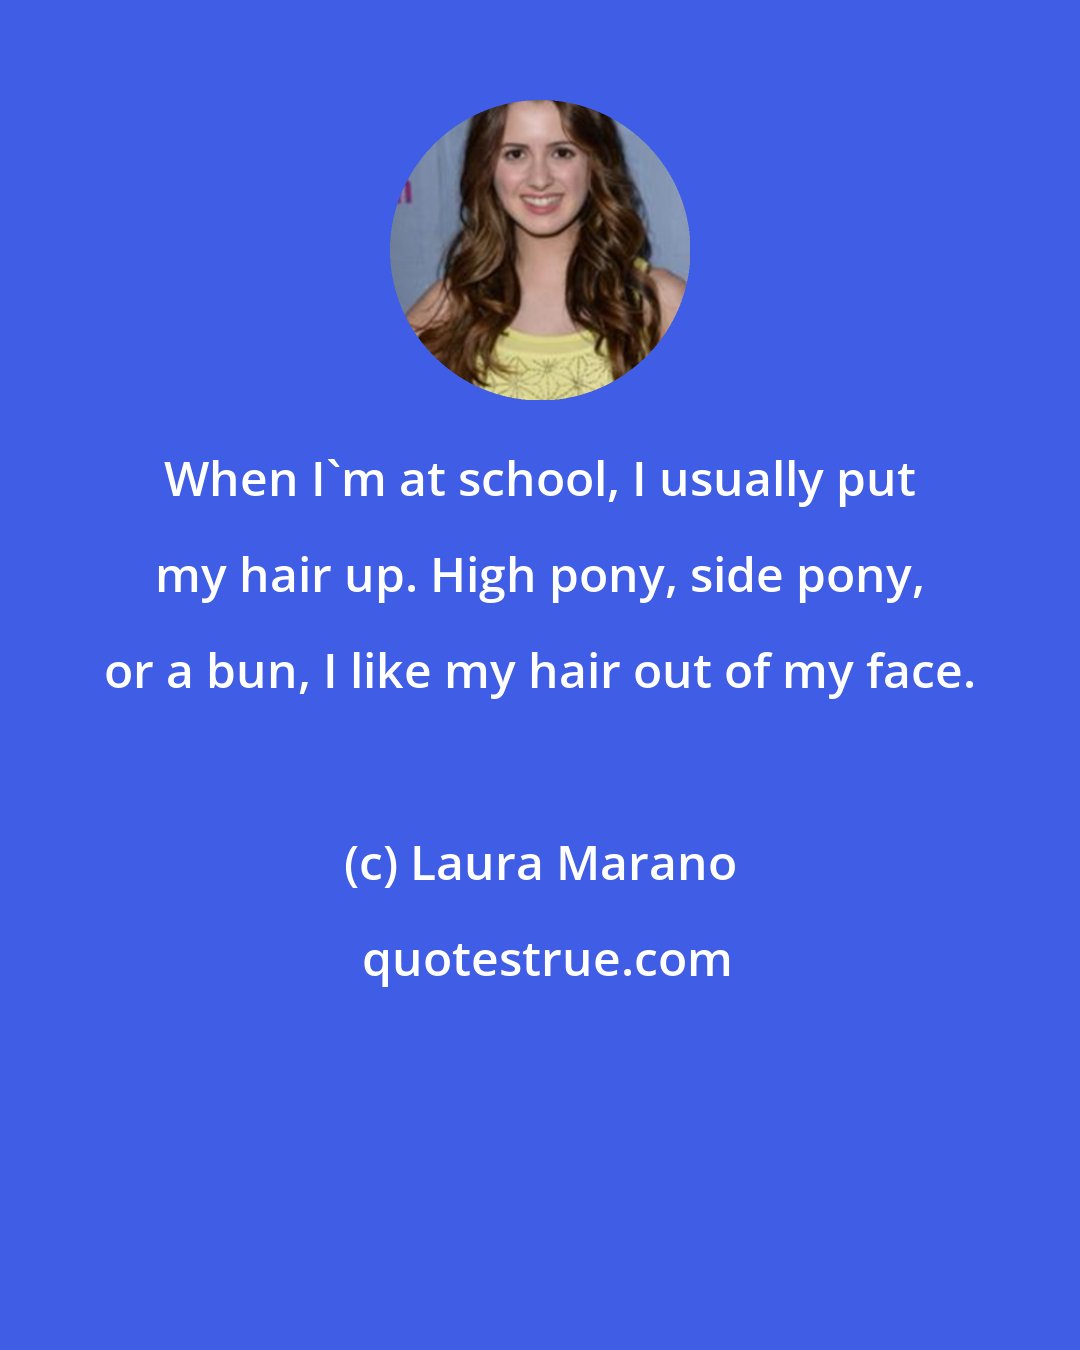 Laura Marano: When I'm at school, I usually put my hair up. High pony, side pony, or a bun, I like my hair out of my face.